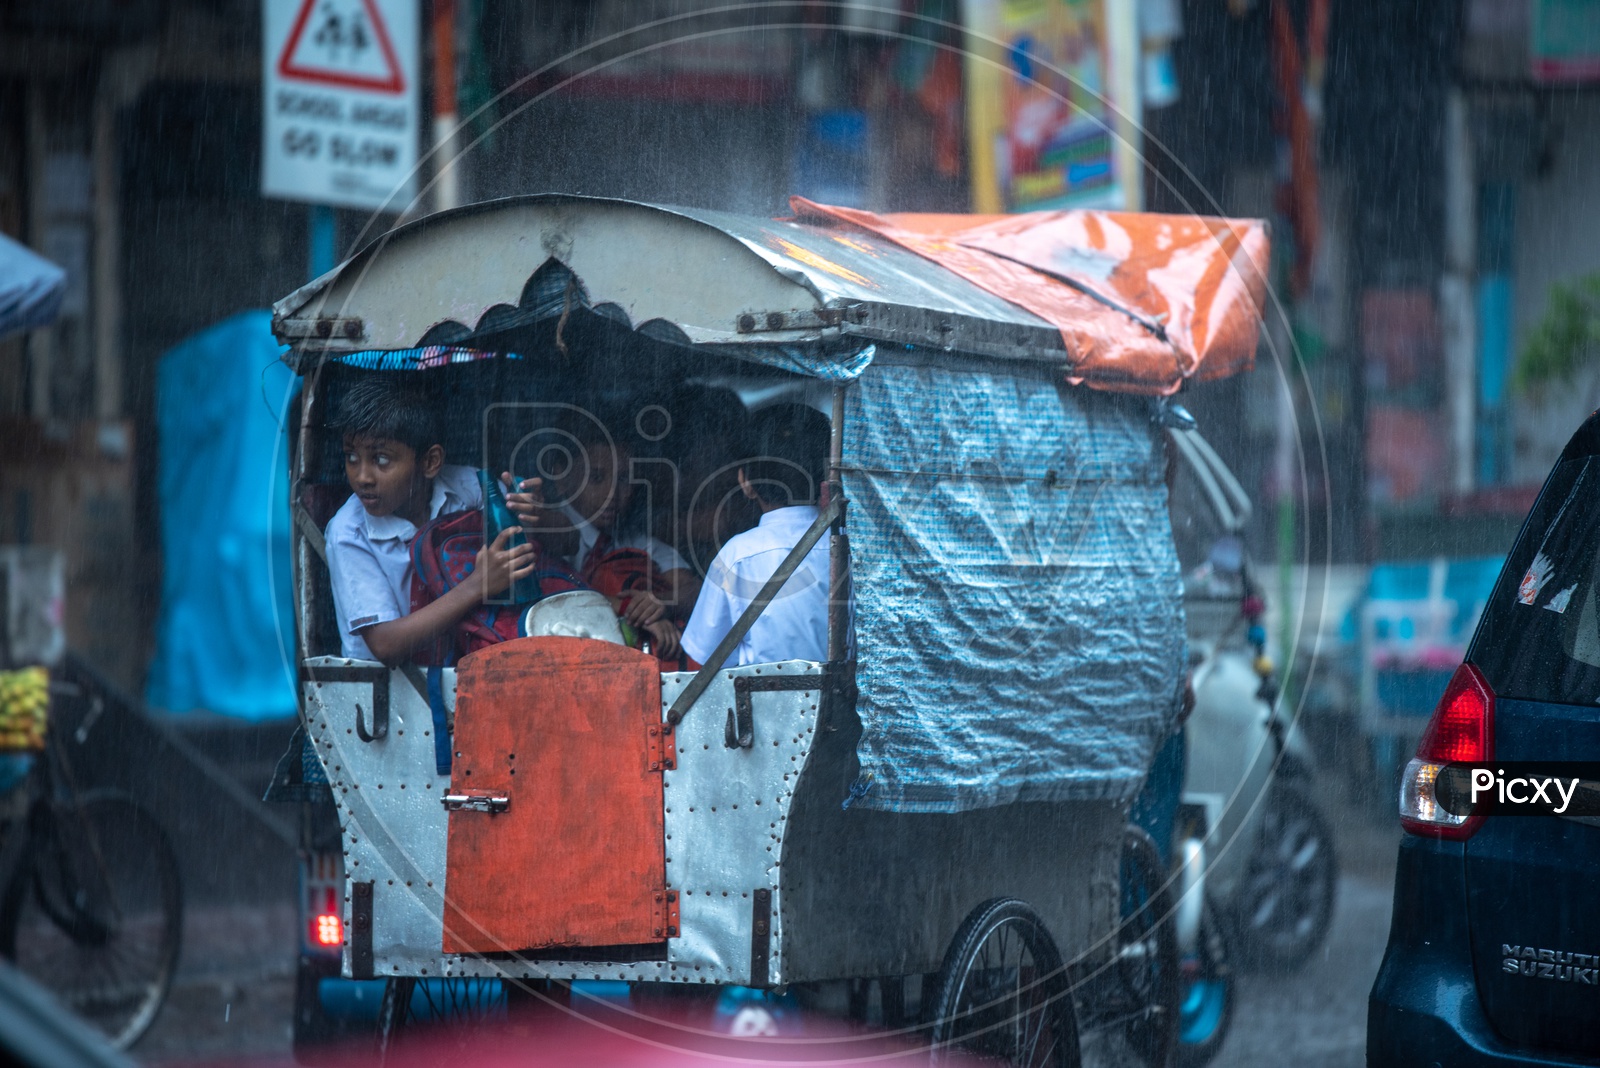 School Children In a Auto Going   To a School On a  Rainy  Day In Kolkata